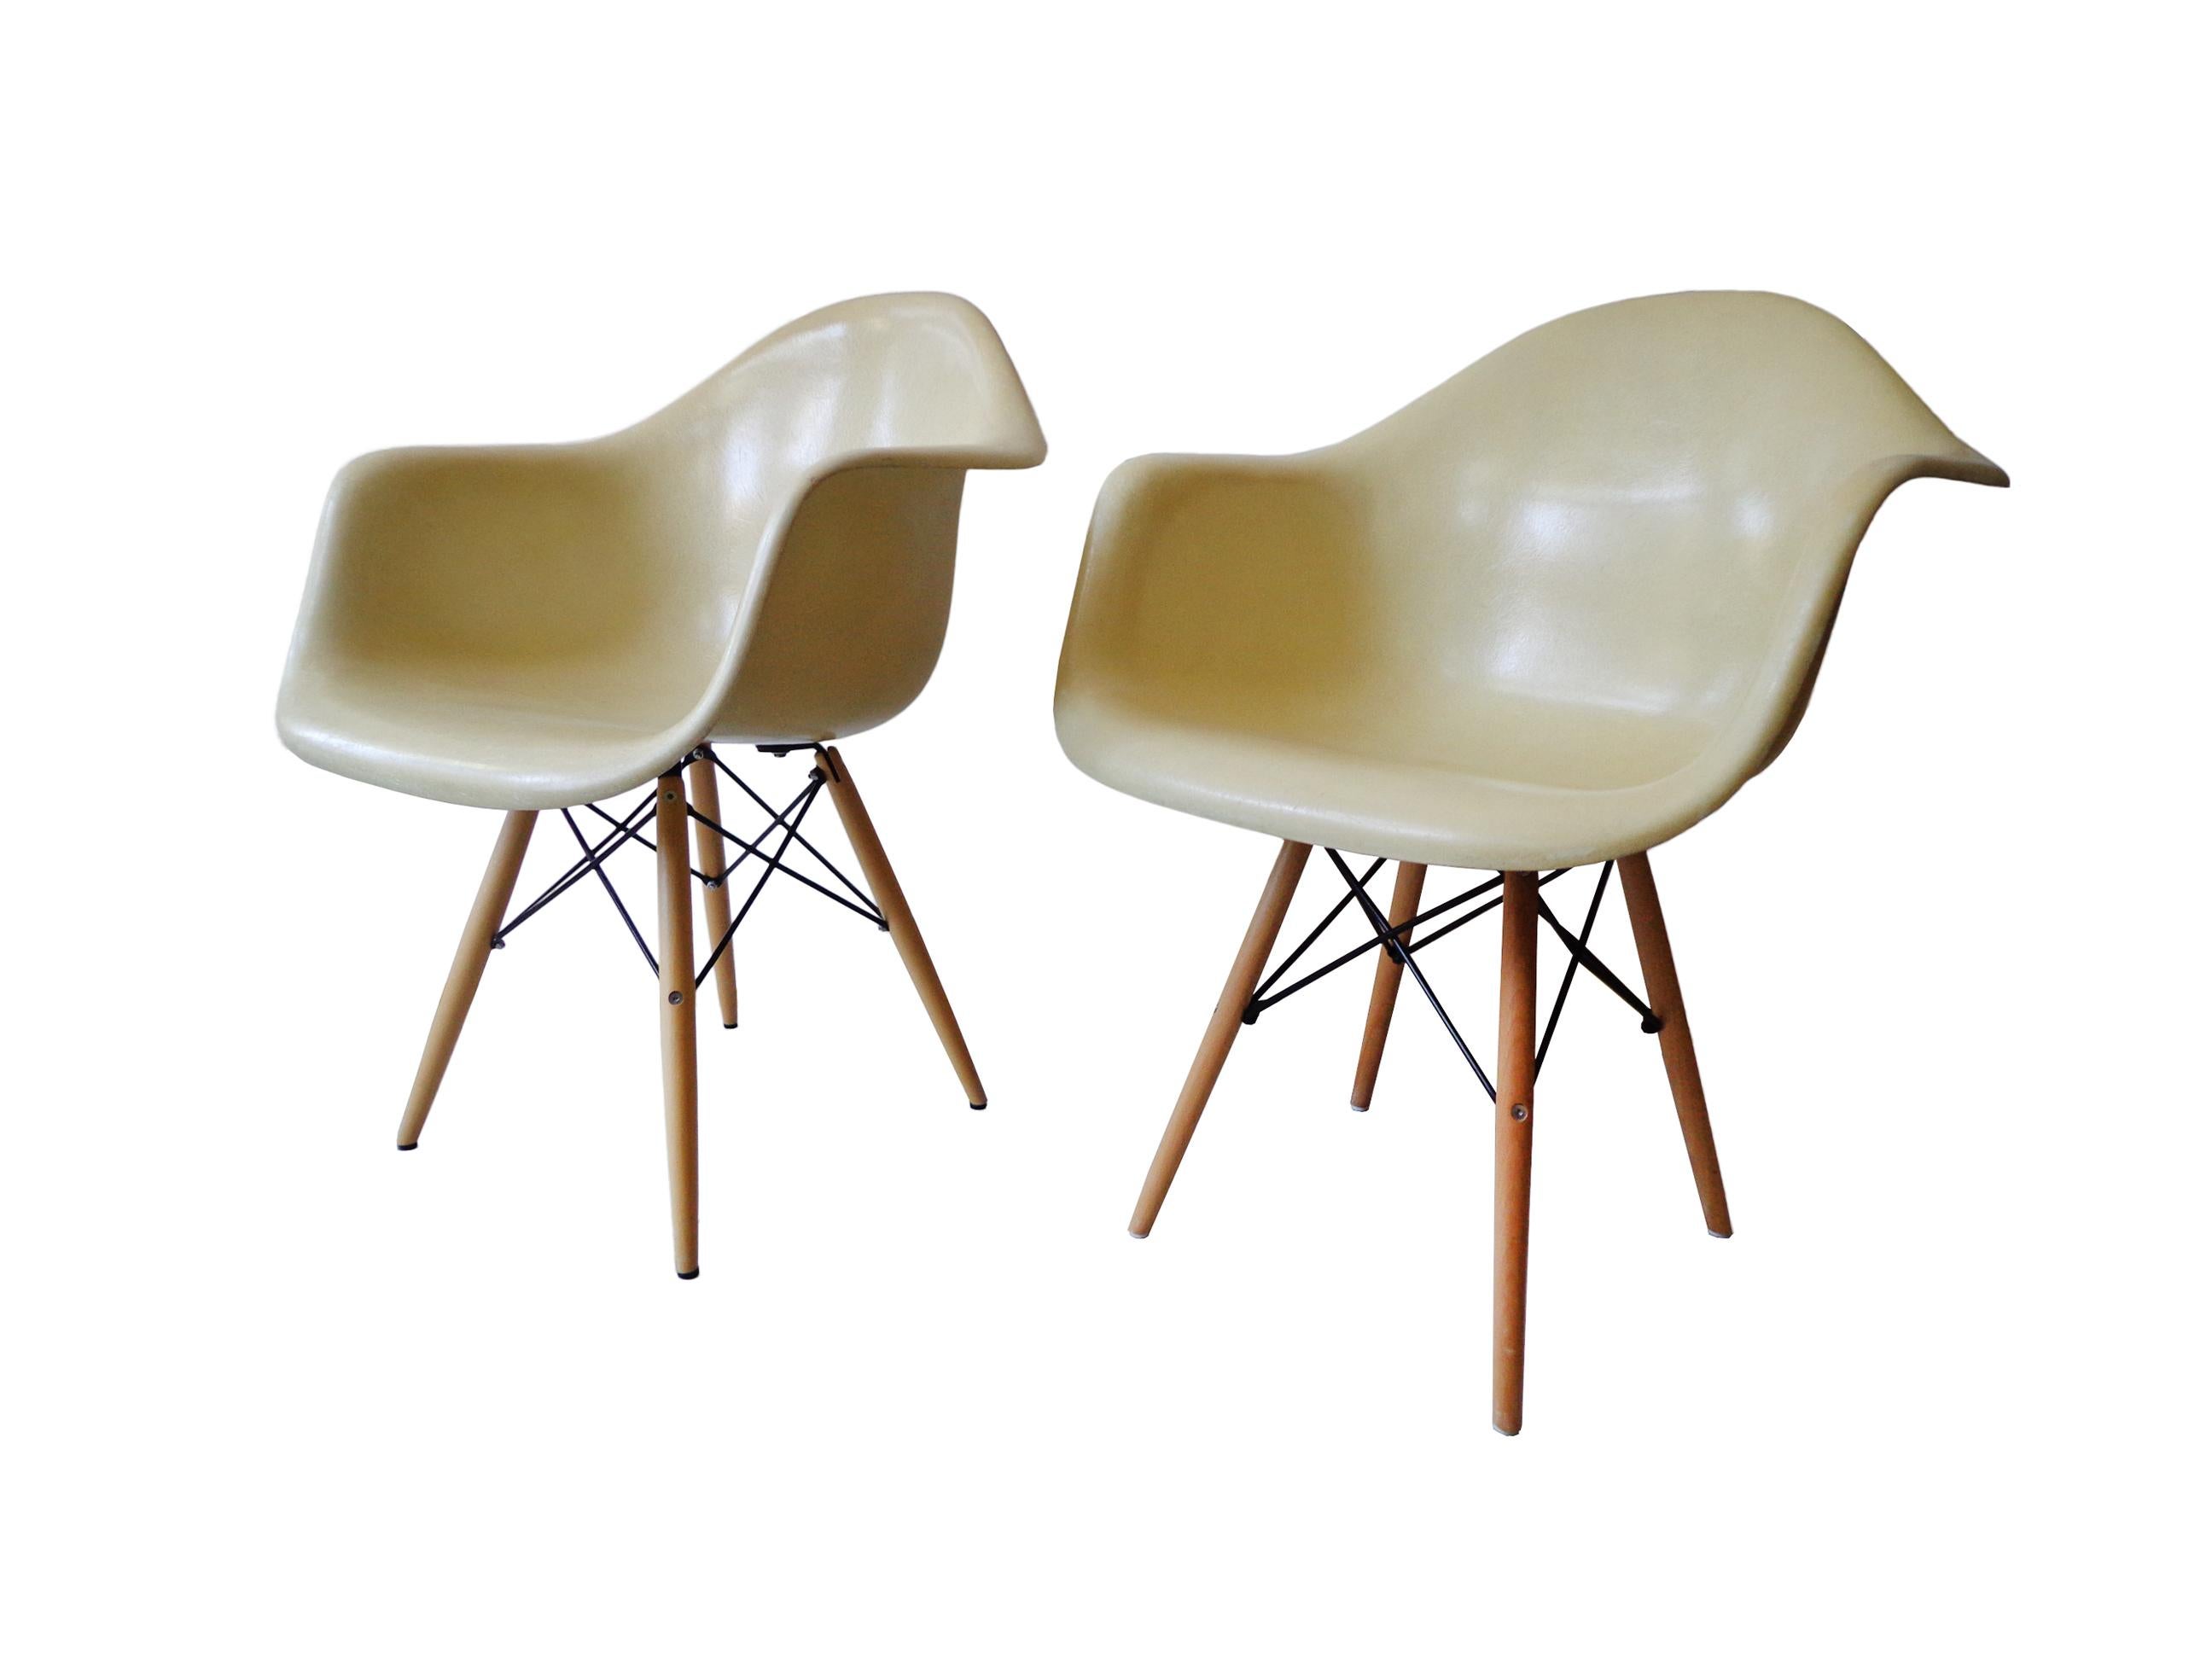 Offerd by Zitzo, Amsterdam: Here we have a iconic design classics from the Mid-Century Modern period. These vintage fiberglass shell armchair was designed by Charles Eames and produced by Herman Miller, circa 1970. The Dowel base is from a later